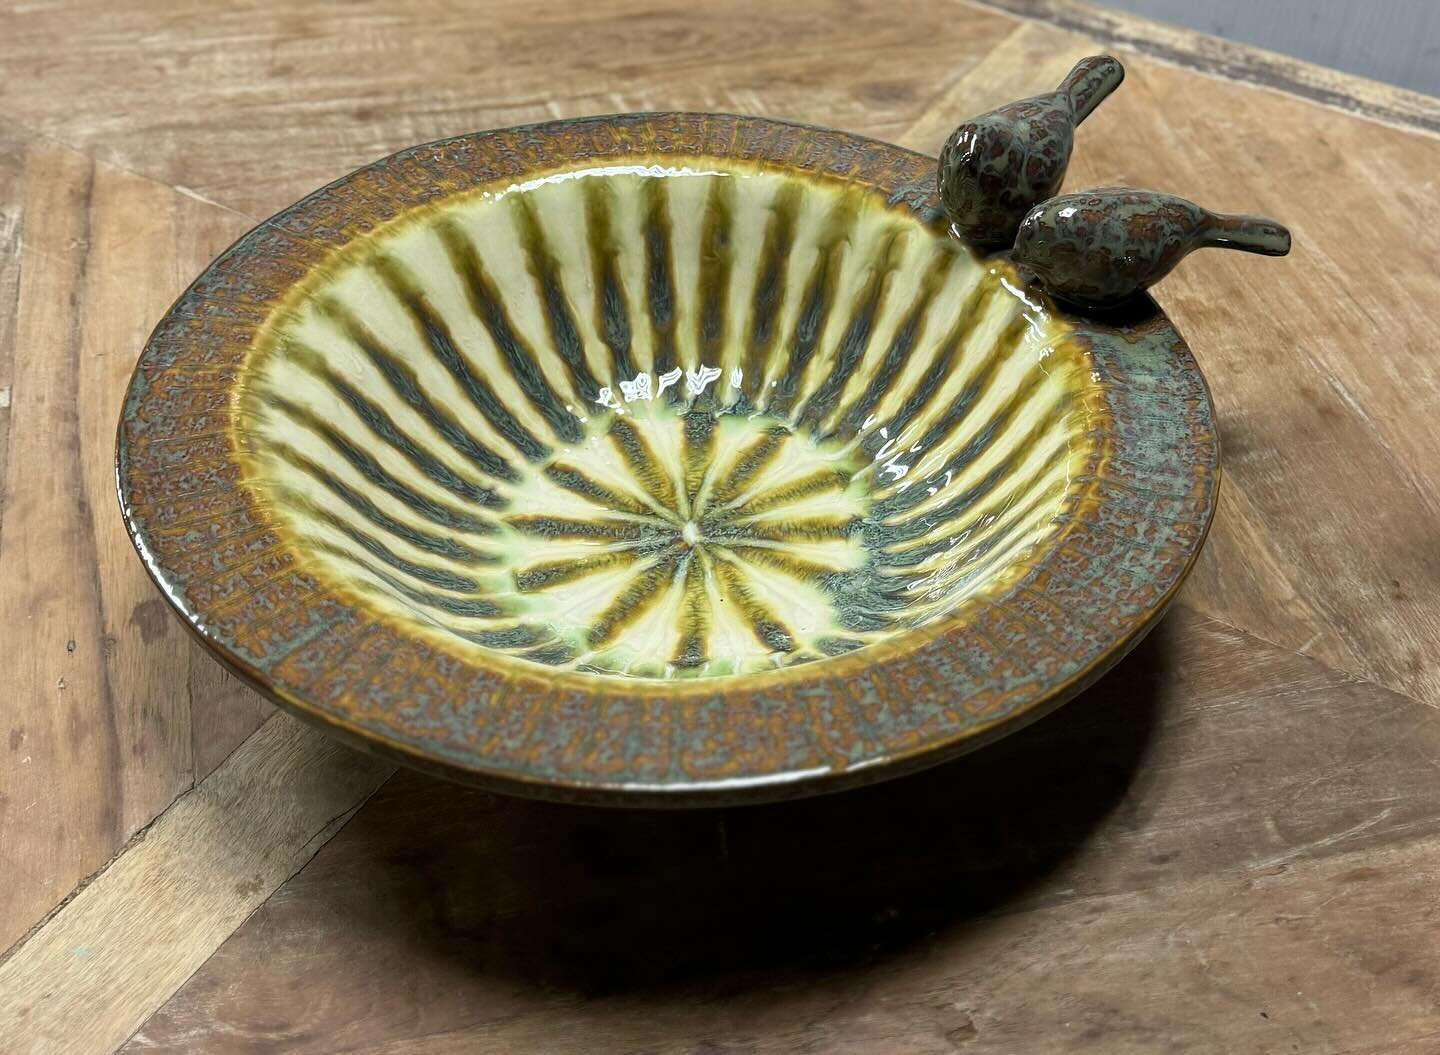 Our bell bowl with birds in pattern ✨BLUE BIRD✨

#goodearthpottery #goodearth  #pottery #bluebird